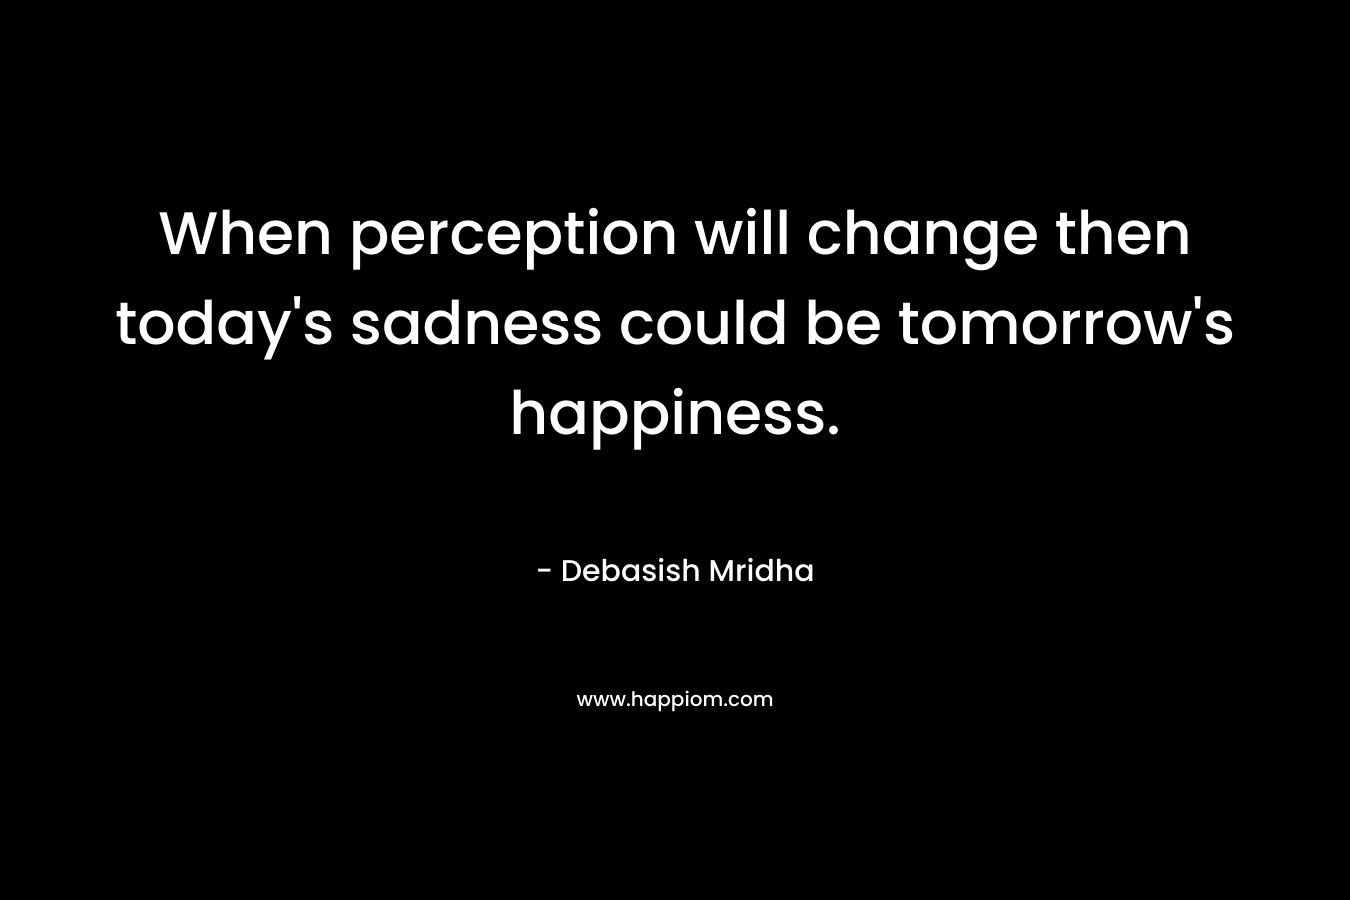 When perception will change then today's sadness could be tomorrow's happiness.